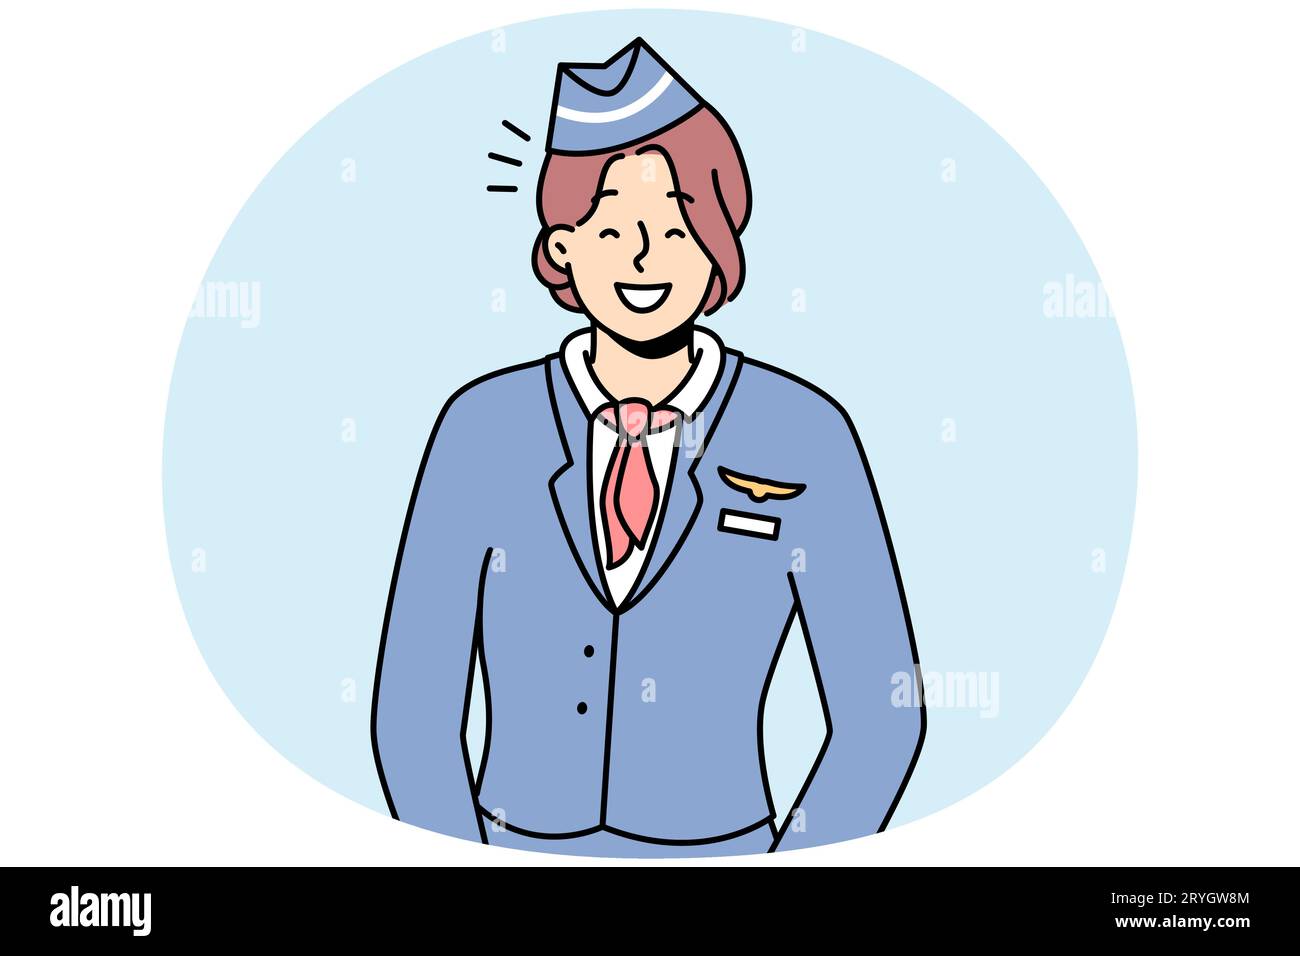 Portrait of smiling young female stewardess in uniform. Happy woman flight attendant feeling optimistic and positive. Occupation. Vector illustration. Stock Vector